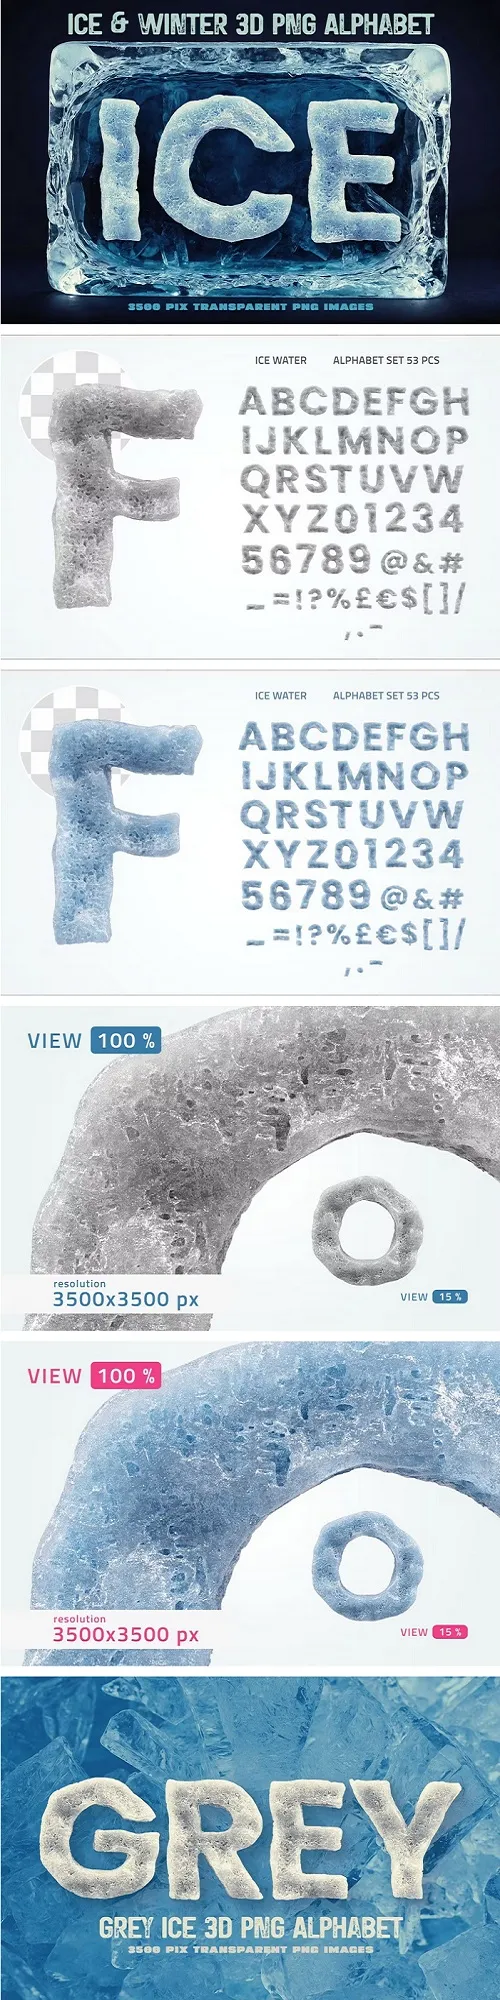 Ice or Water PNG Alphabet - XYFGAZX